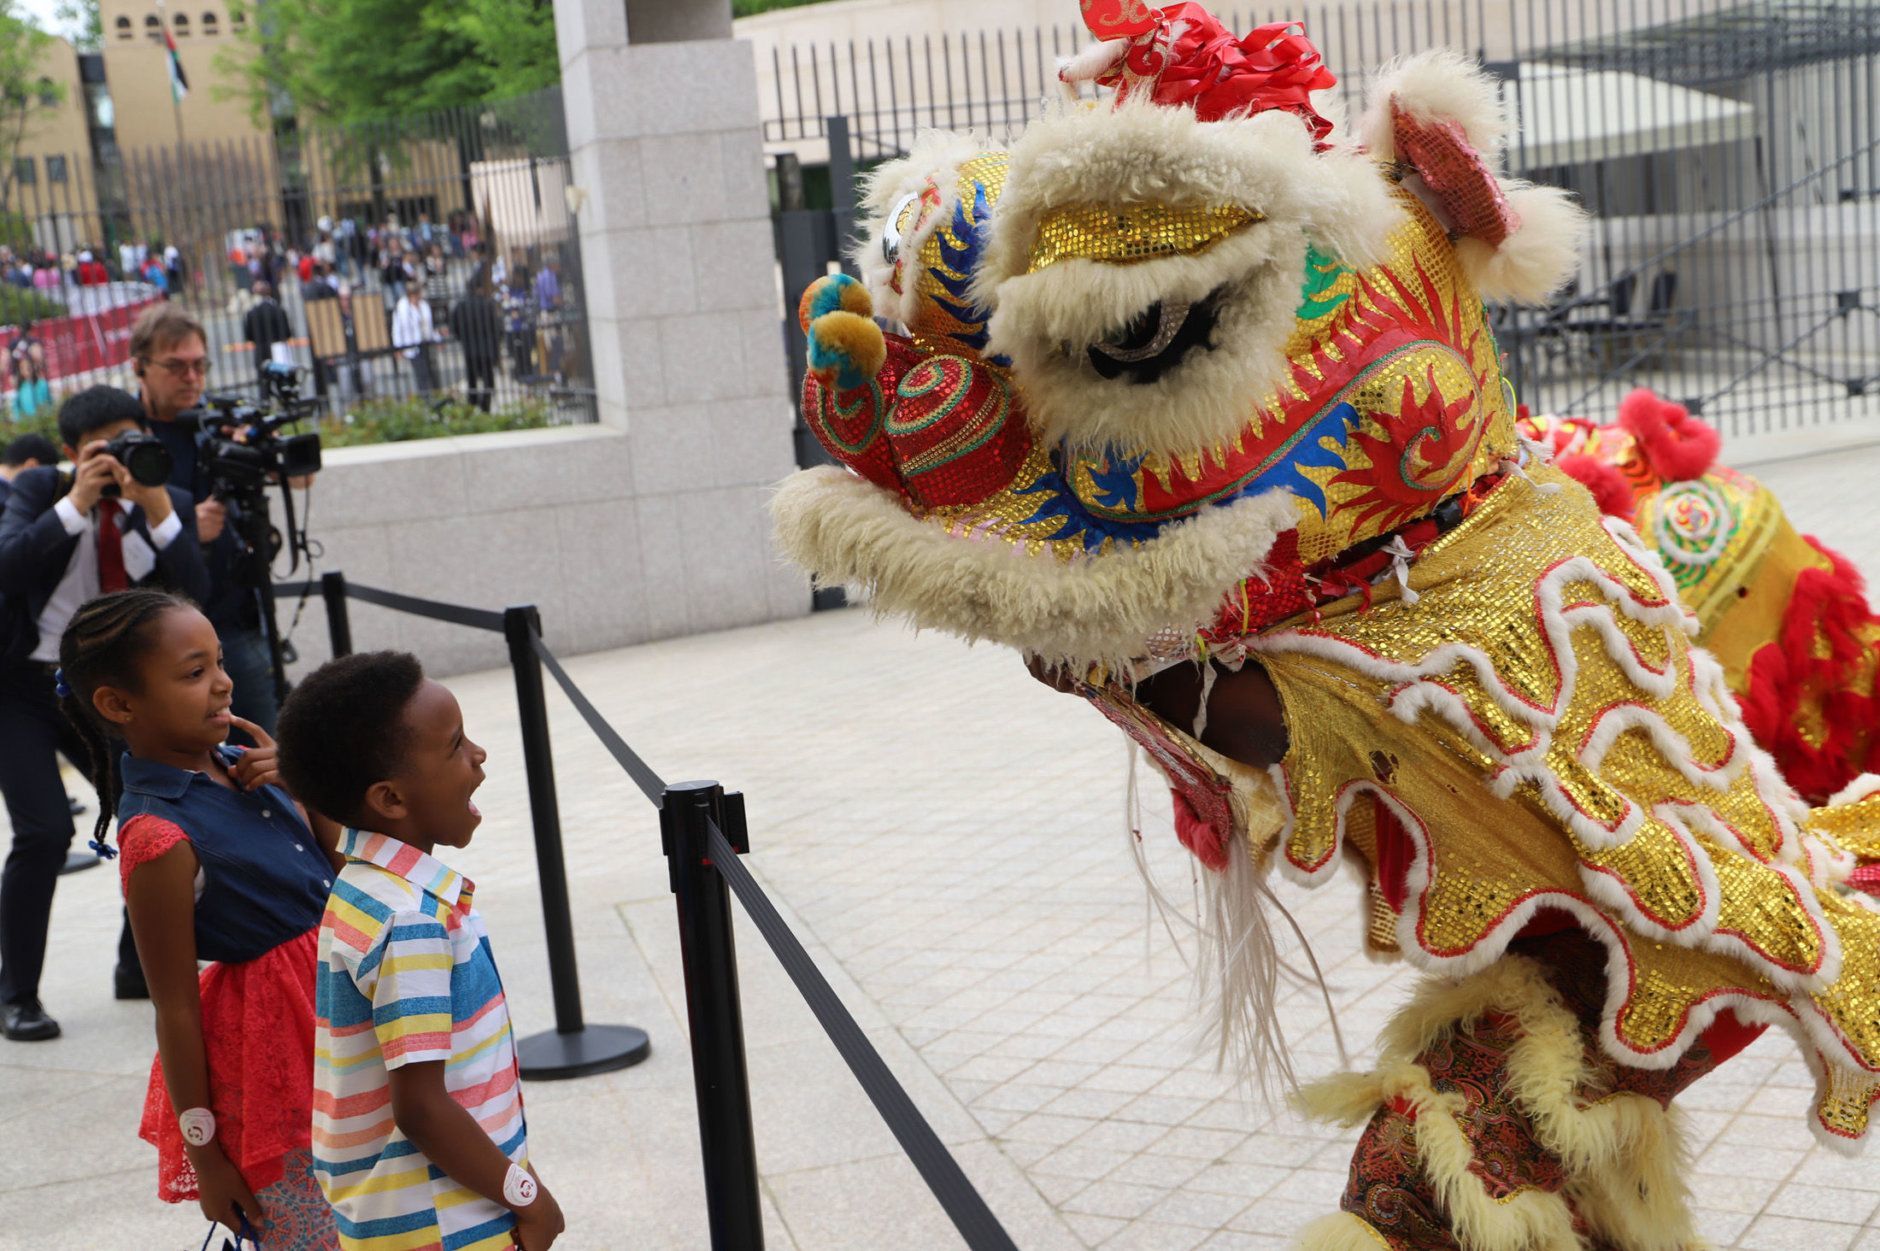 Entertainment at the 2018 Around the World Embassy Tour. (Courtesy Cultural Tourism DC)